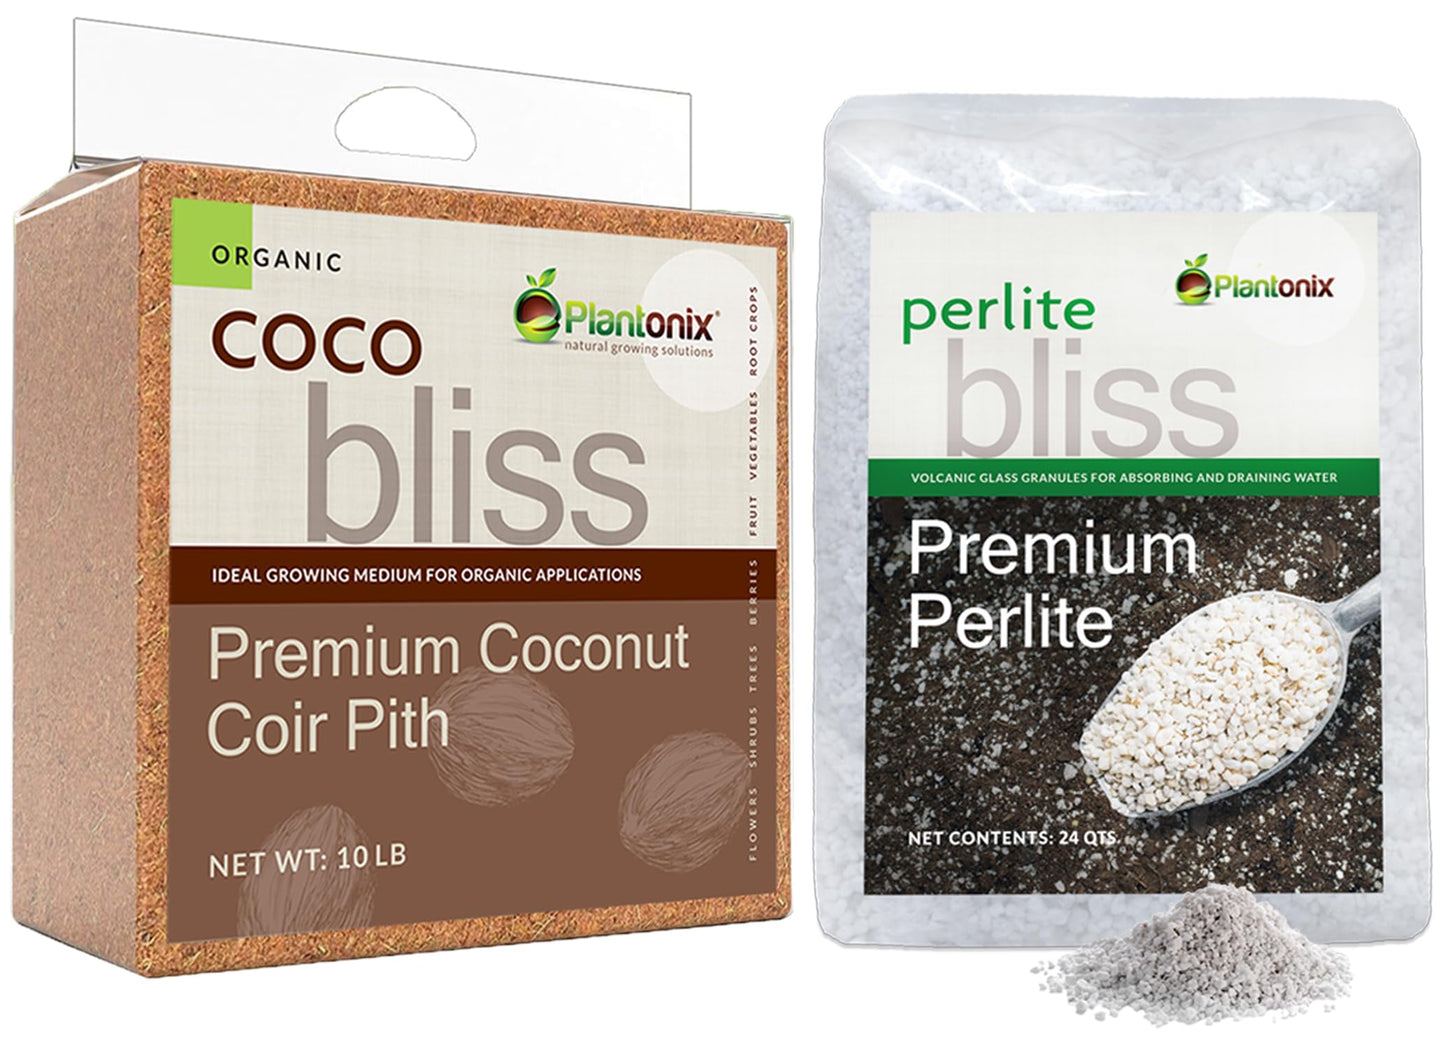 Coco Bliss Coco Coir (10lbs) + Perlite Bliss (24 Qt) - Compressed Coco Coir Pith - Horticultural Perlite - Renewable Coconut Soil for Flowers, Plants, and Gardening - OMRI Listed Soil Amendments